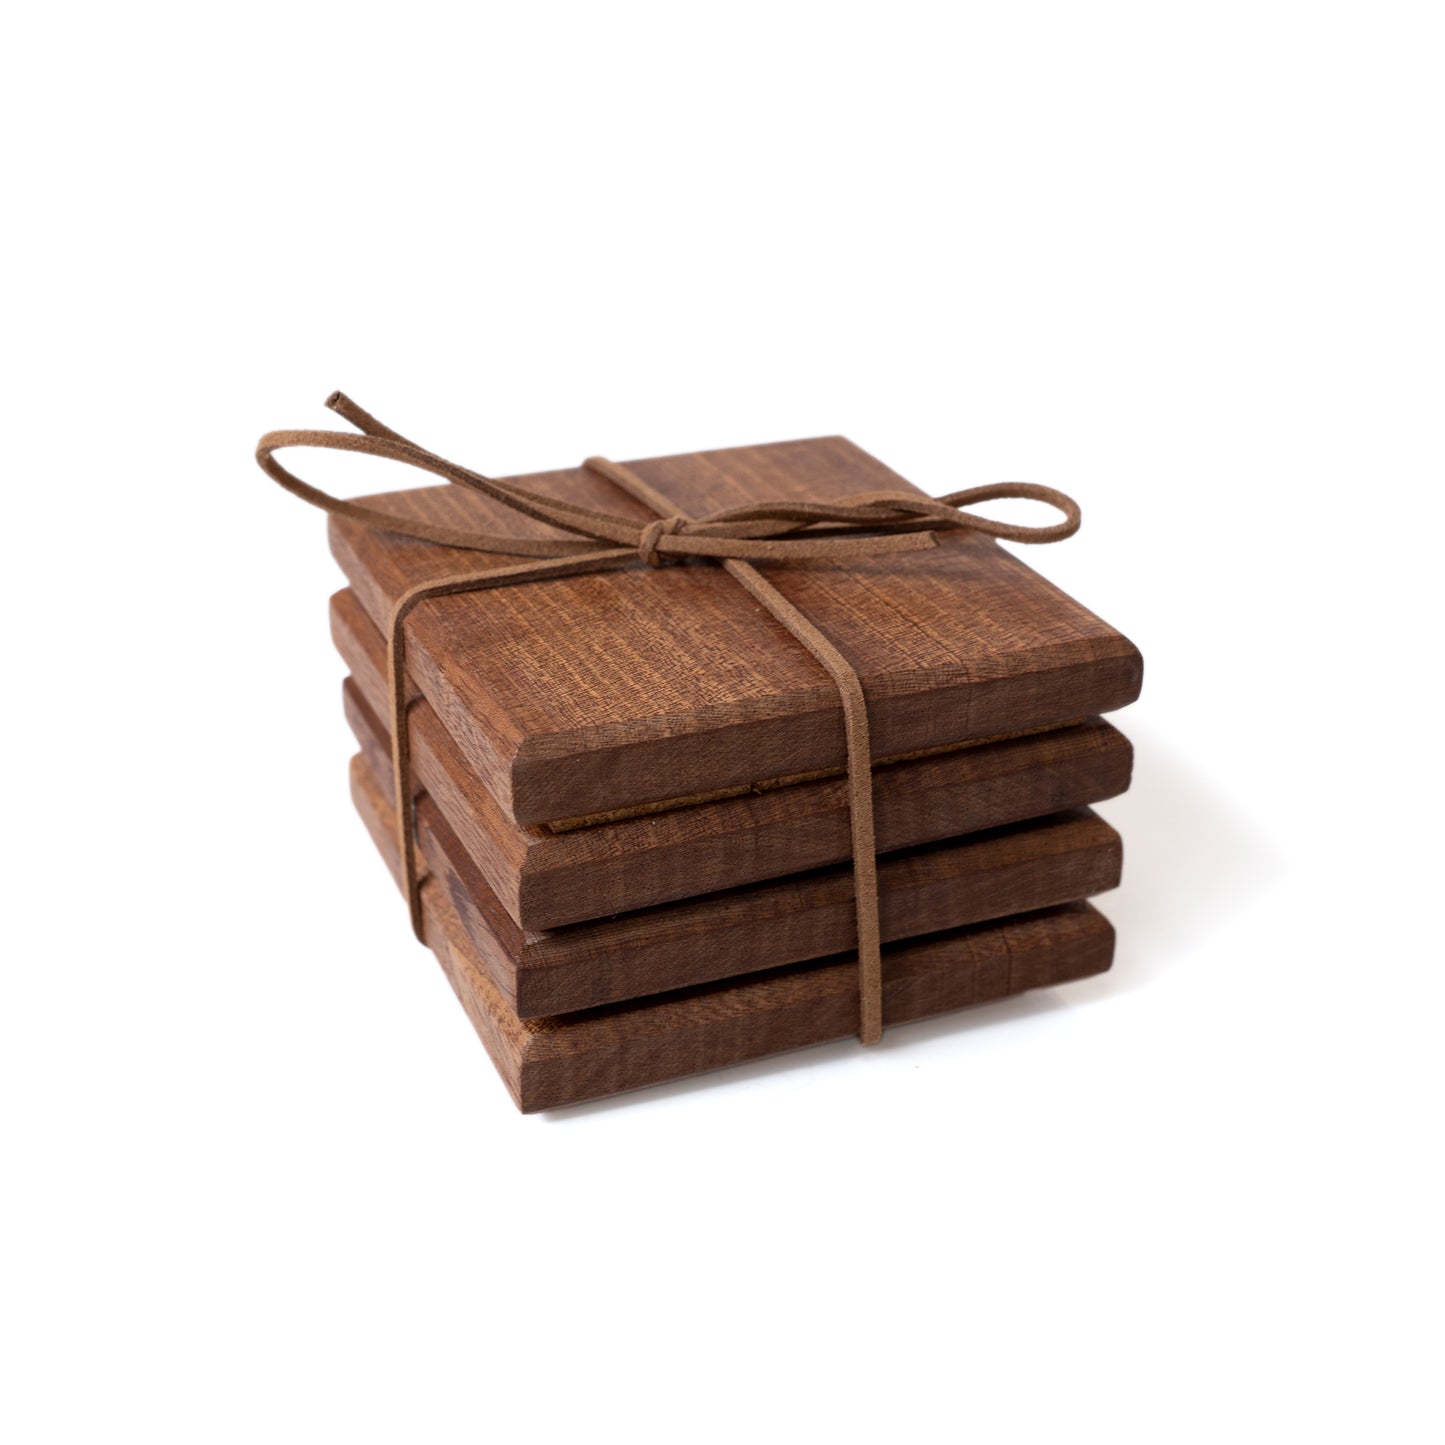 Handcrafted Wood Coaster Set of 4